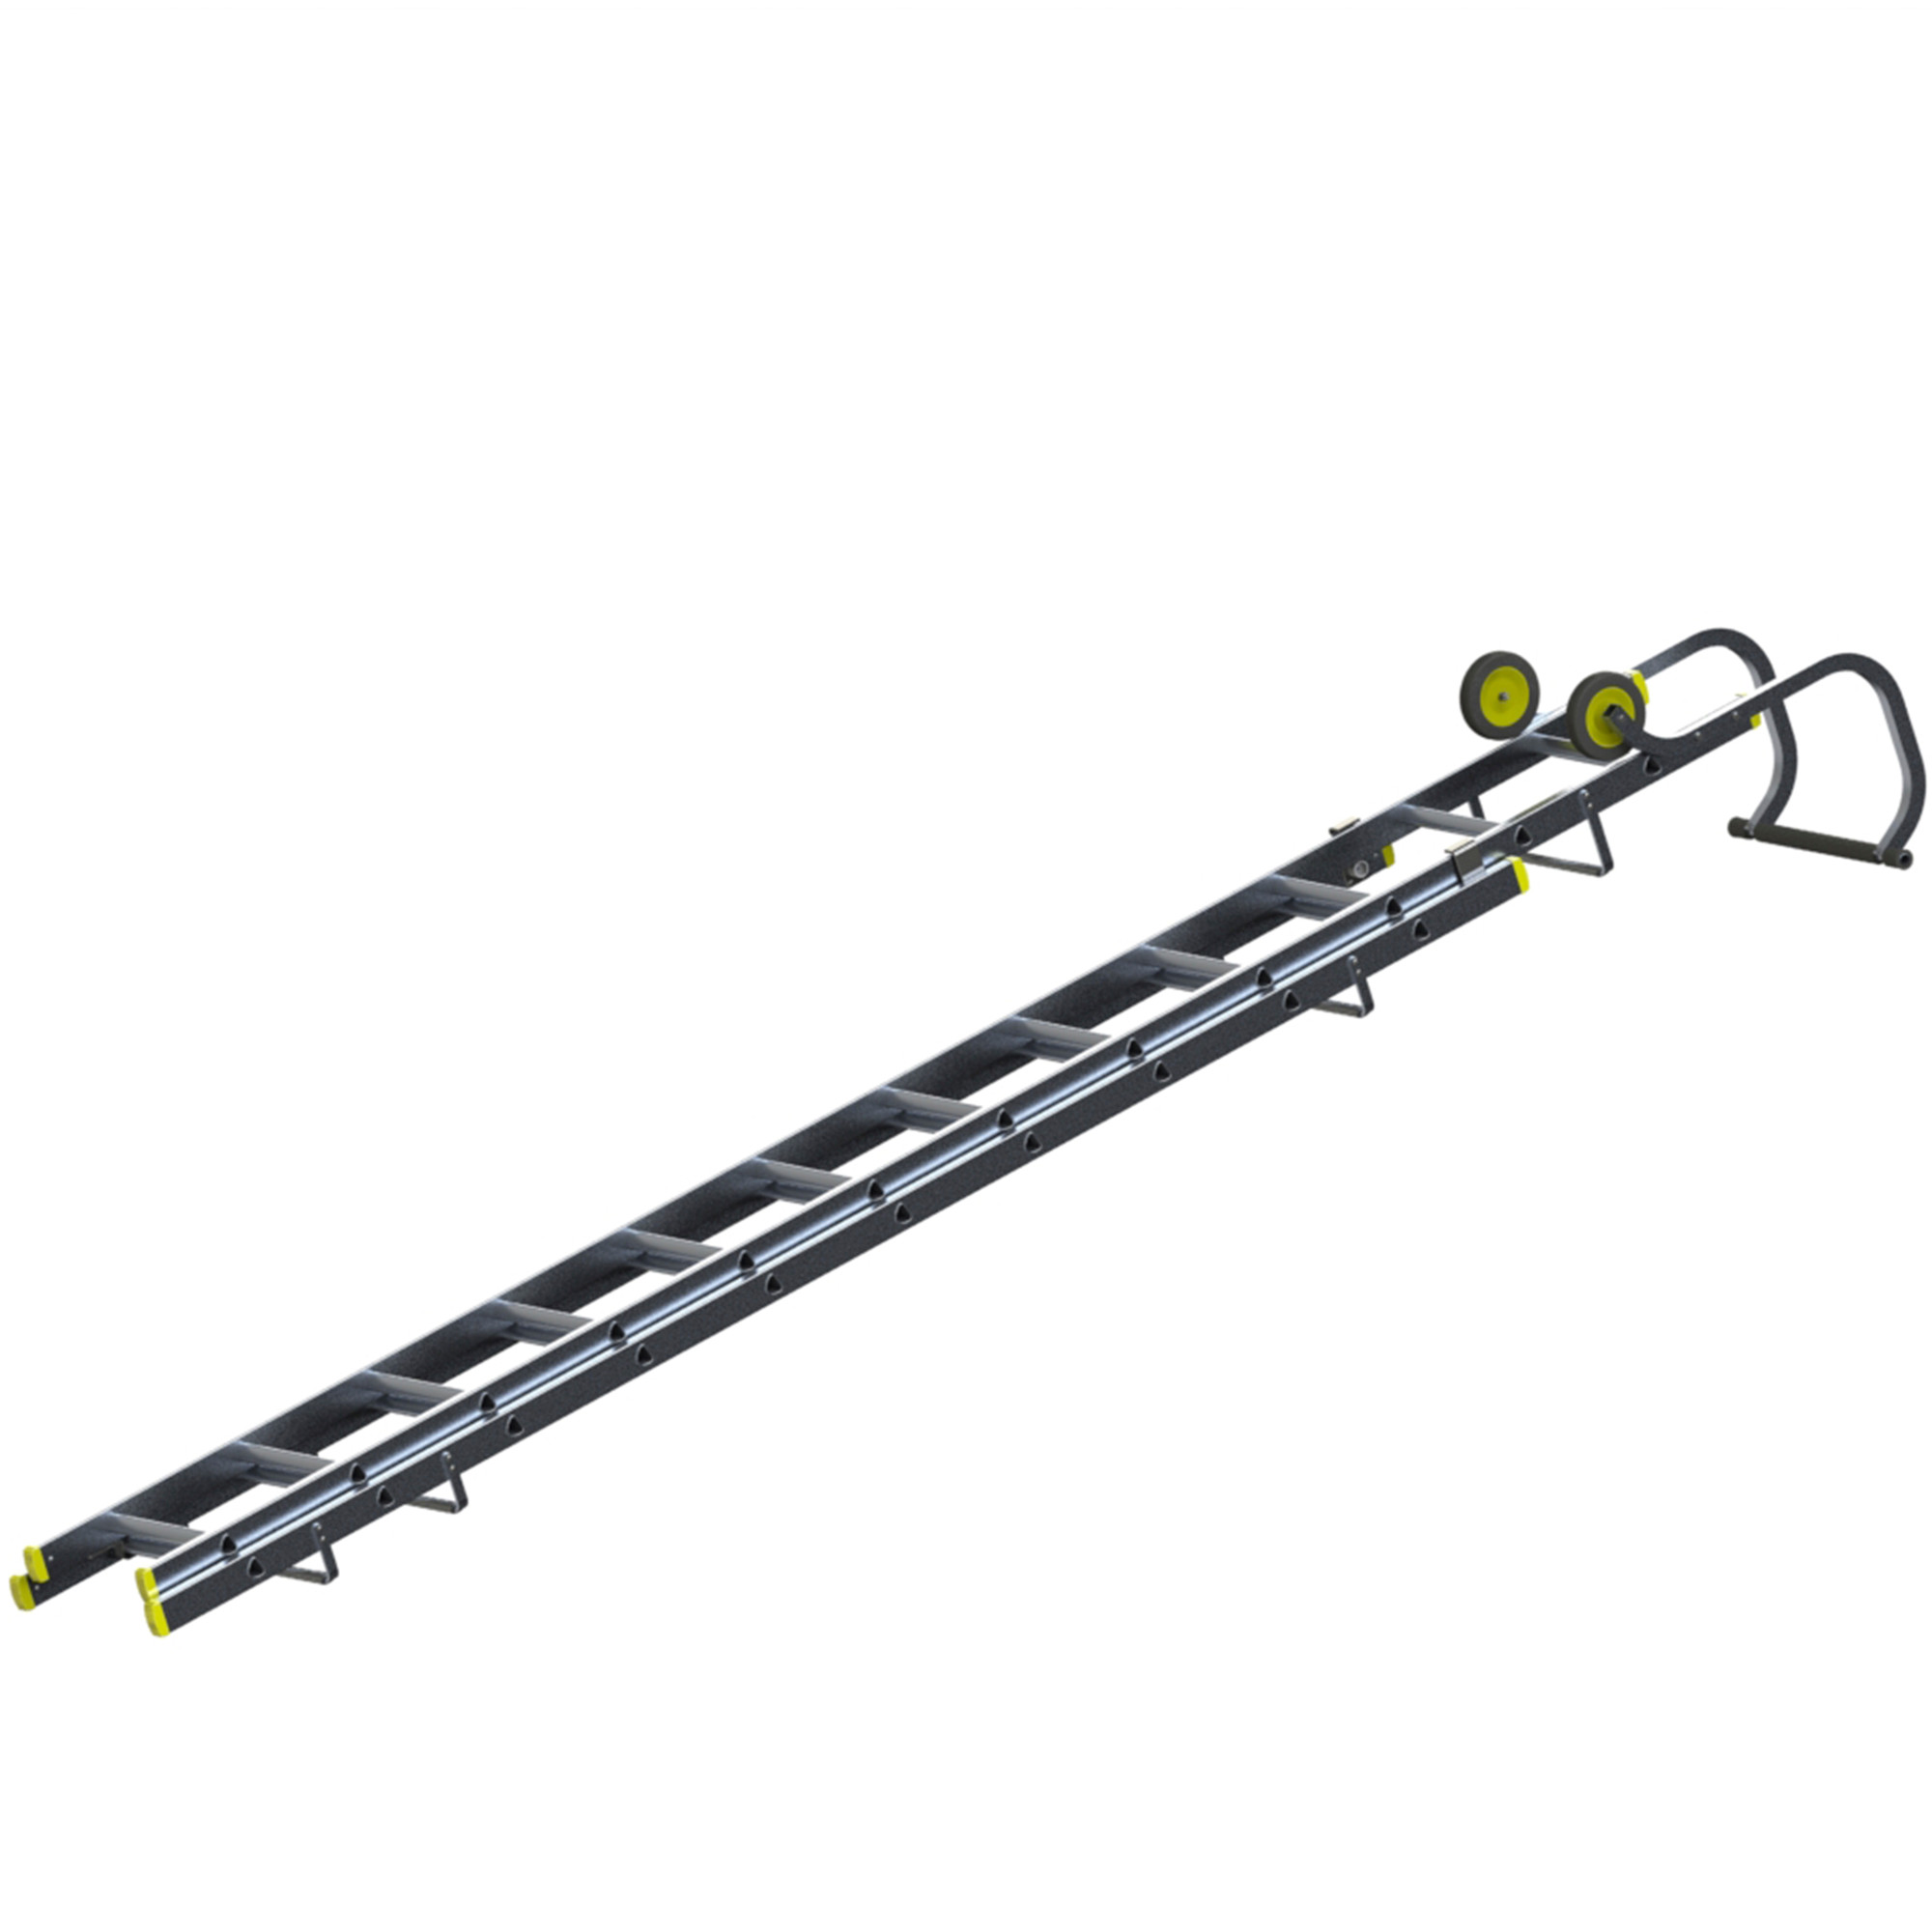 Youngman 2 Section Roof Ladder